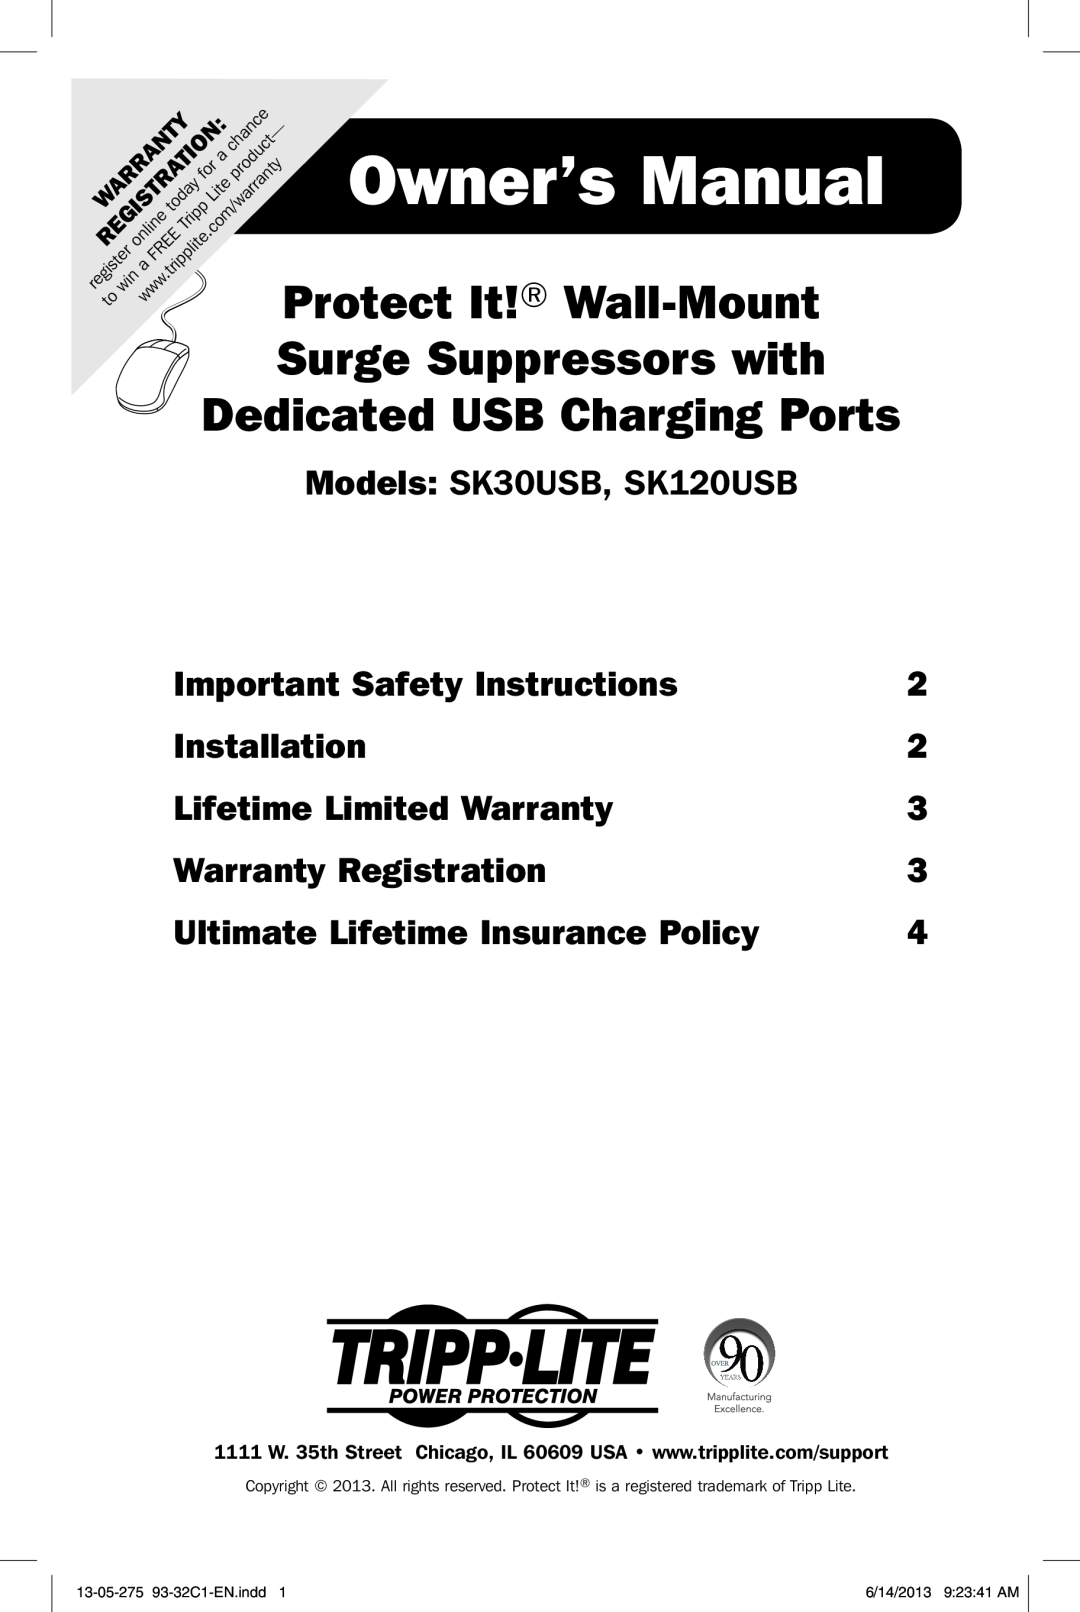 Tripp Lite owner manual Owner’s Manual, Protect It! Wall-Mount, Models SK30USB, SK120USB, Important Safety Instructions 